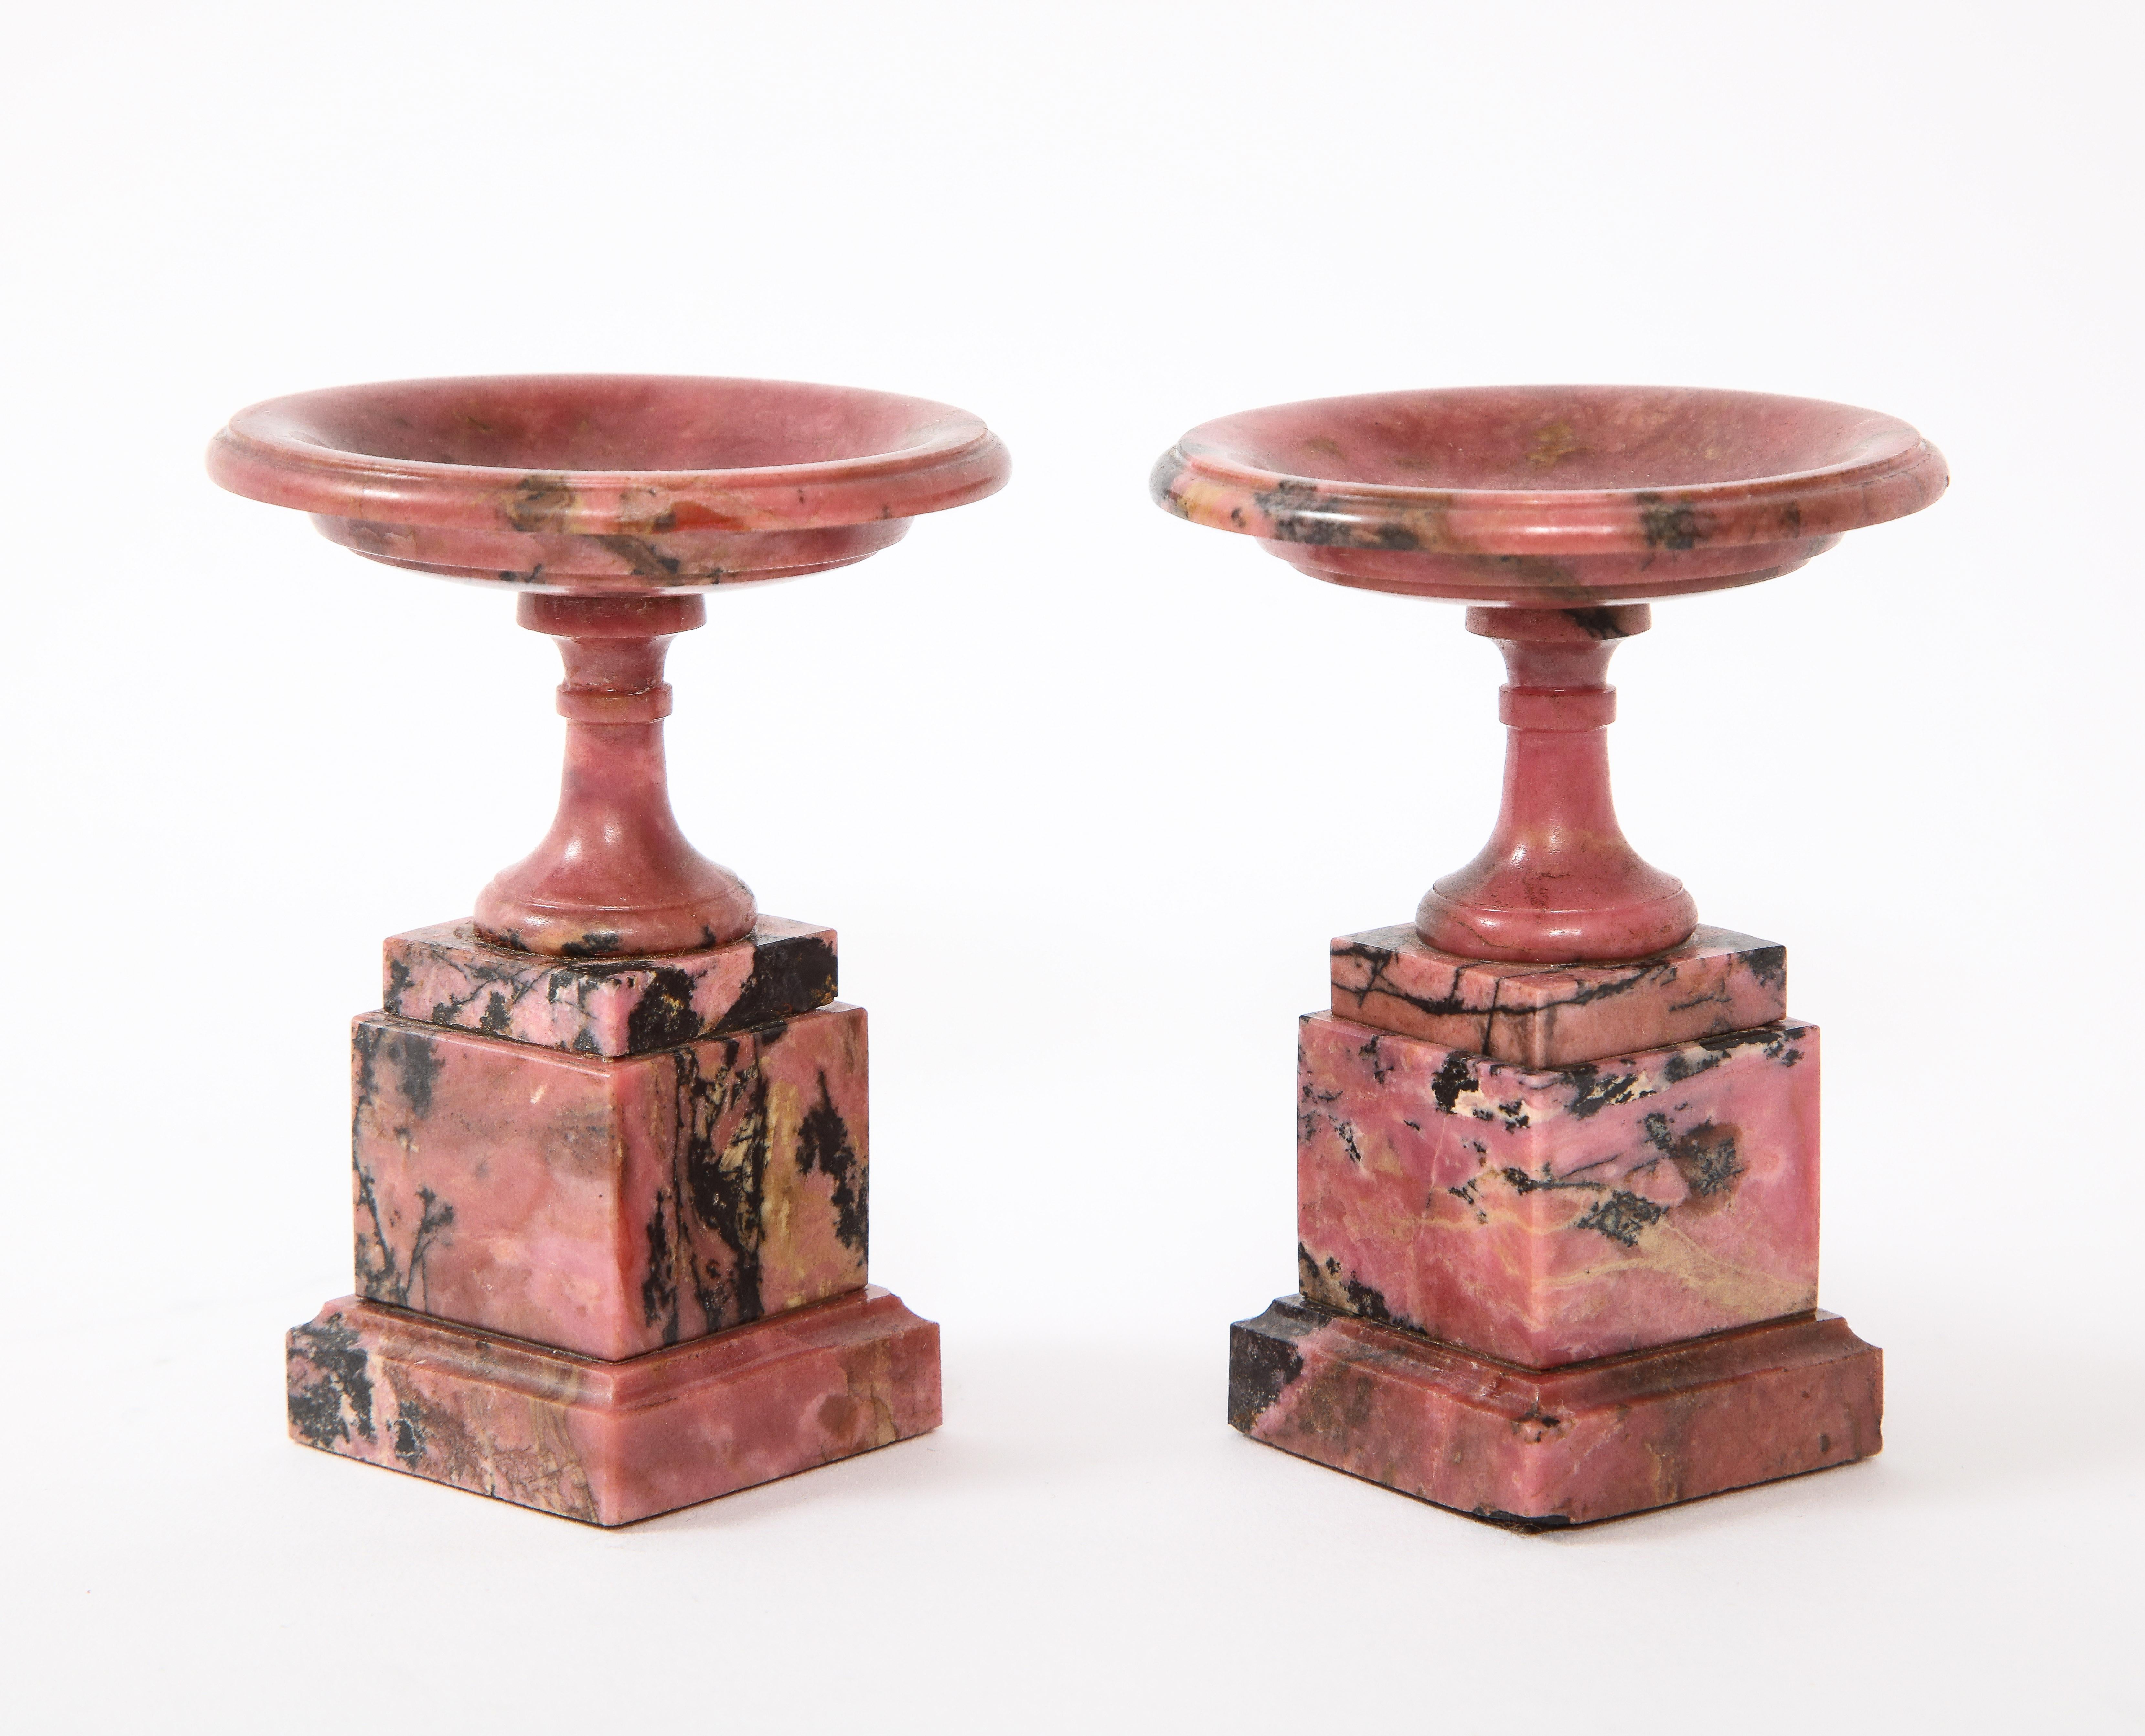 Rare Pair of Early 19th Century Russian Hand Carved Rhodonite Tazzas 1